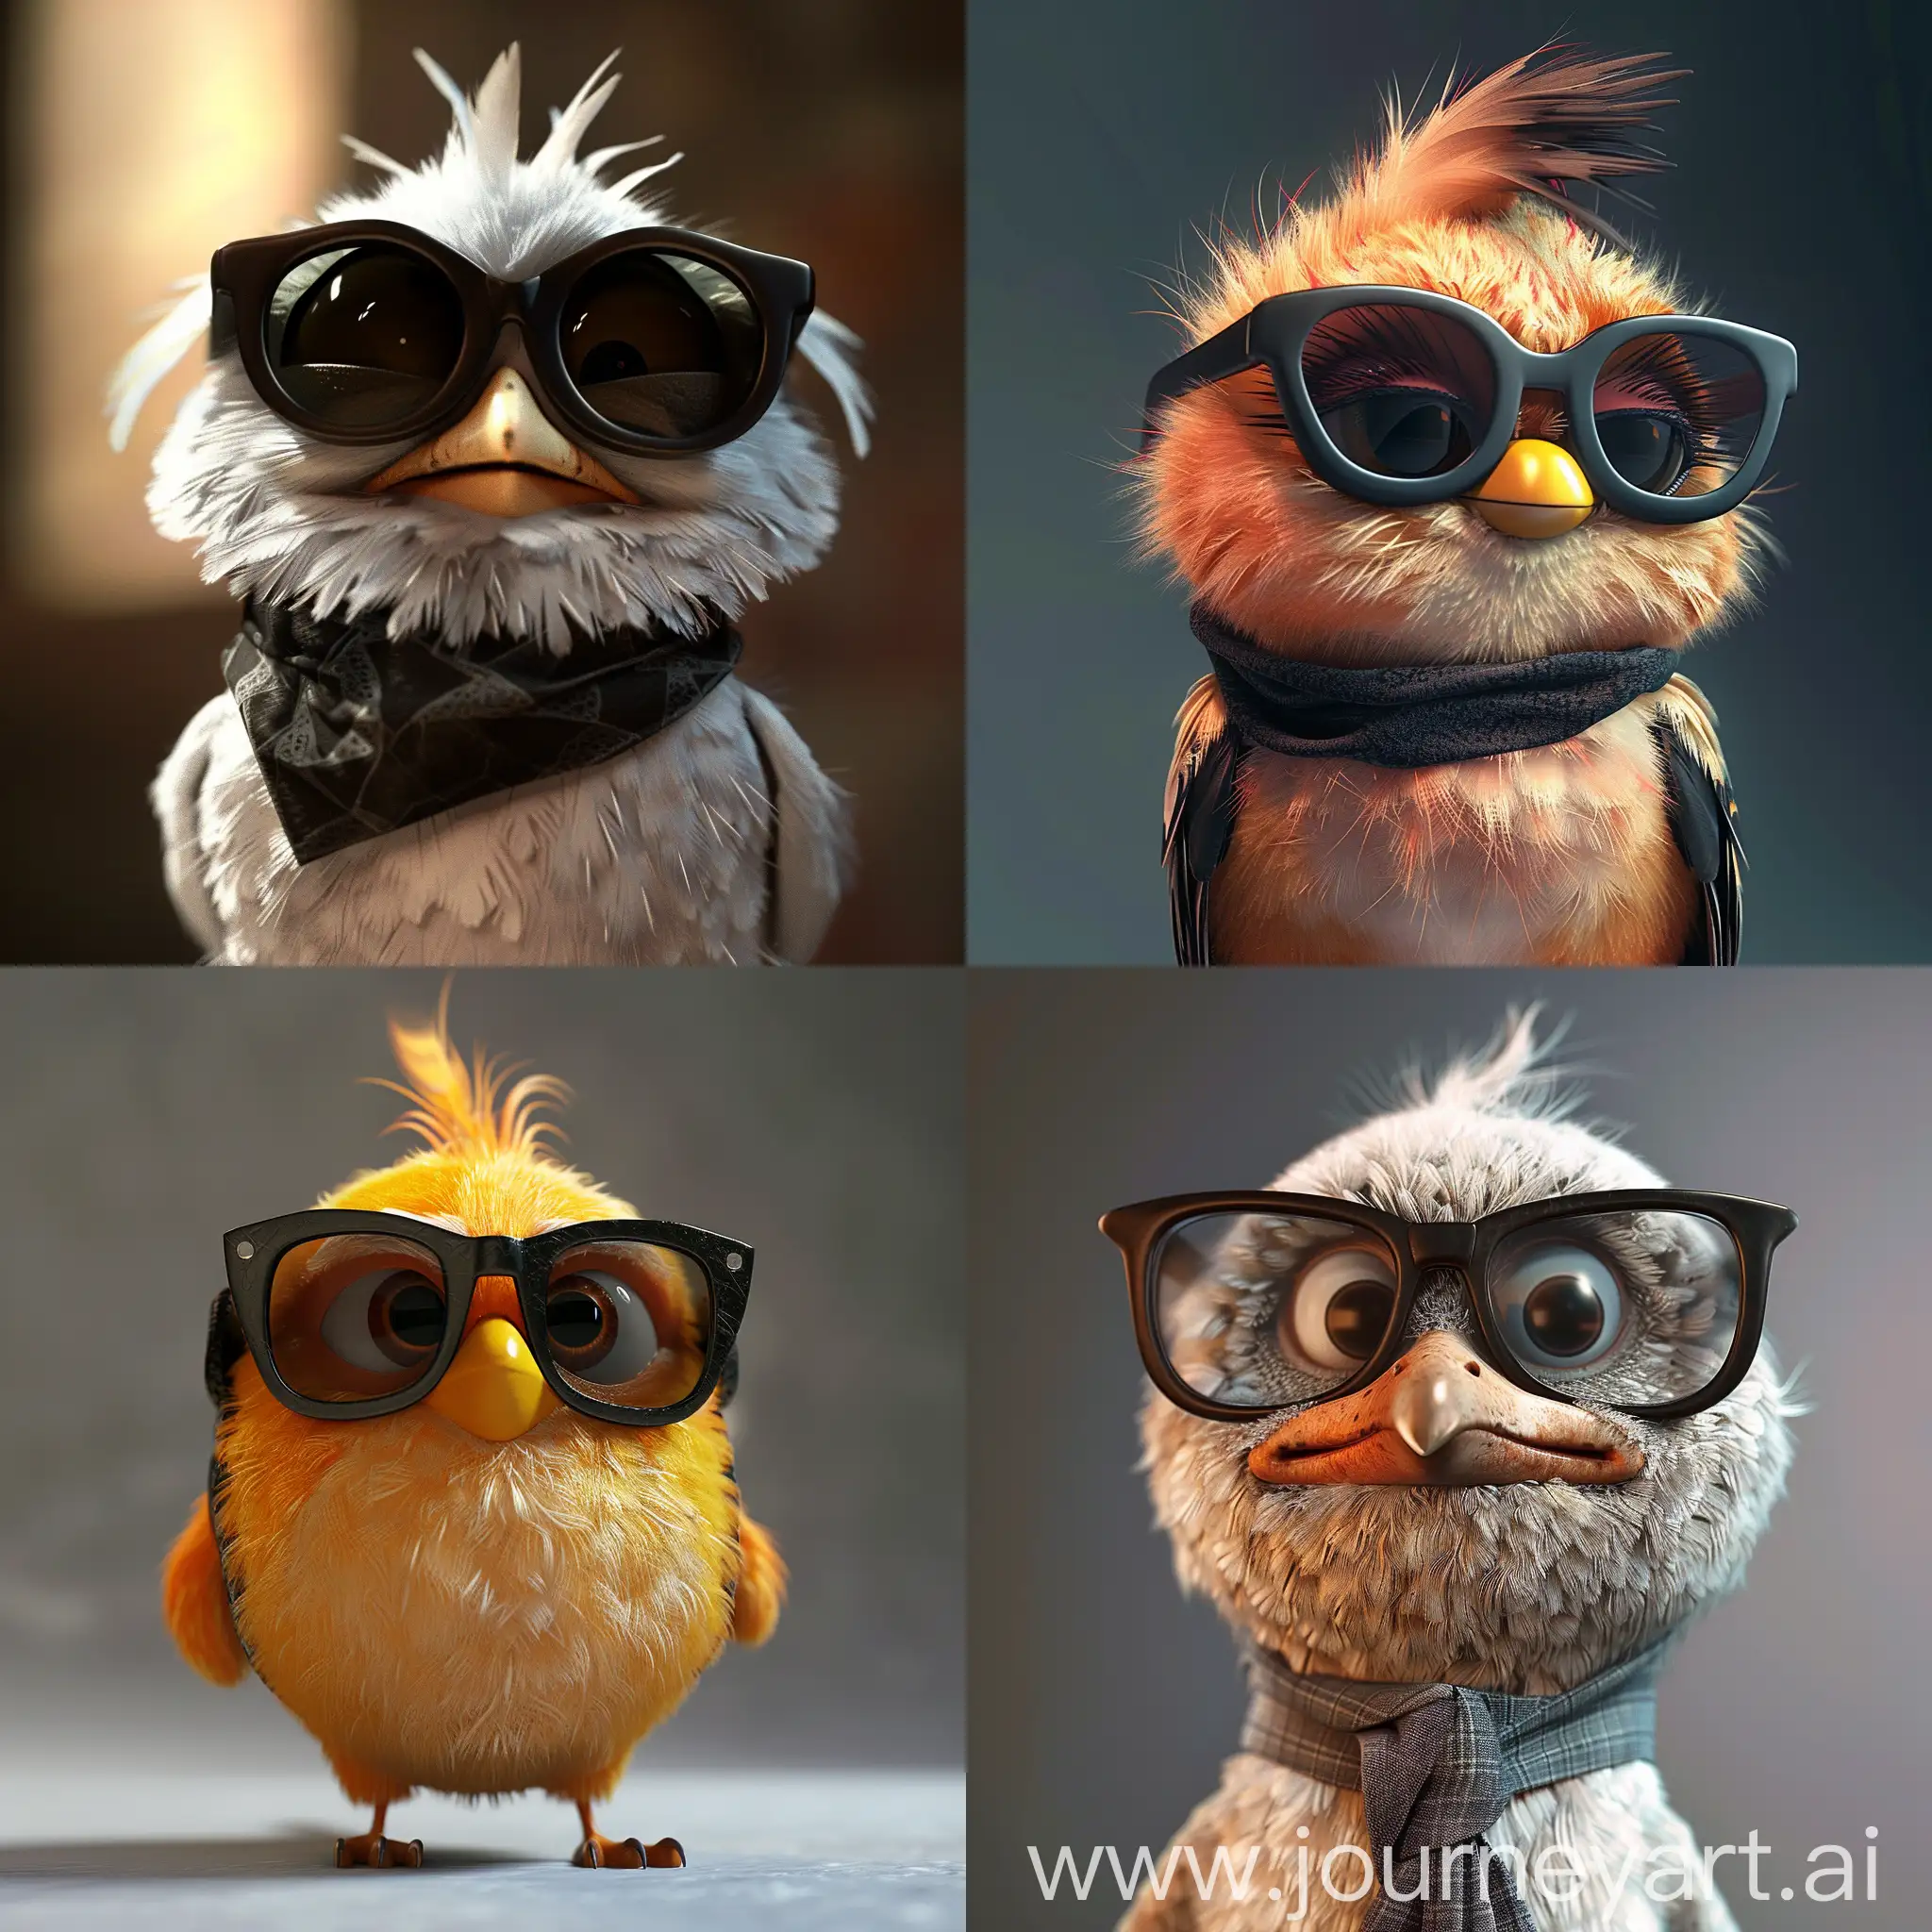 The bird is a smuggler Twitter X, the cool one with the black glasses, style pixar 3D